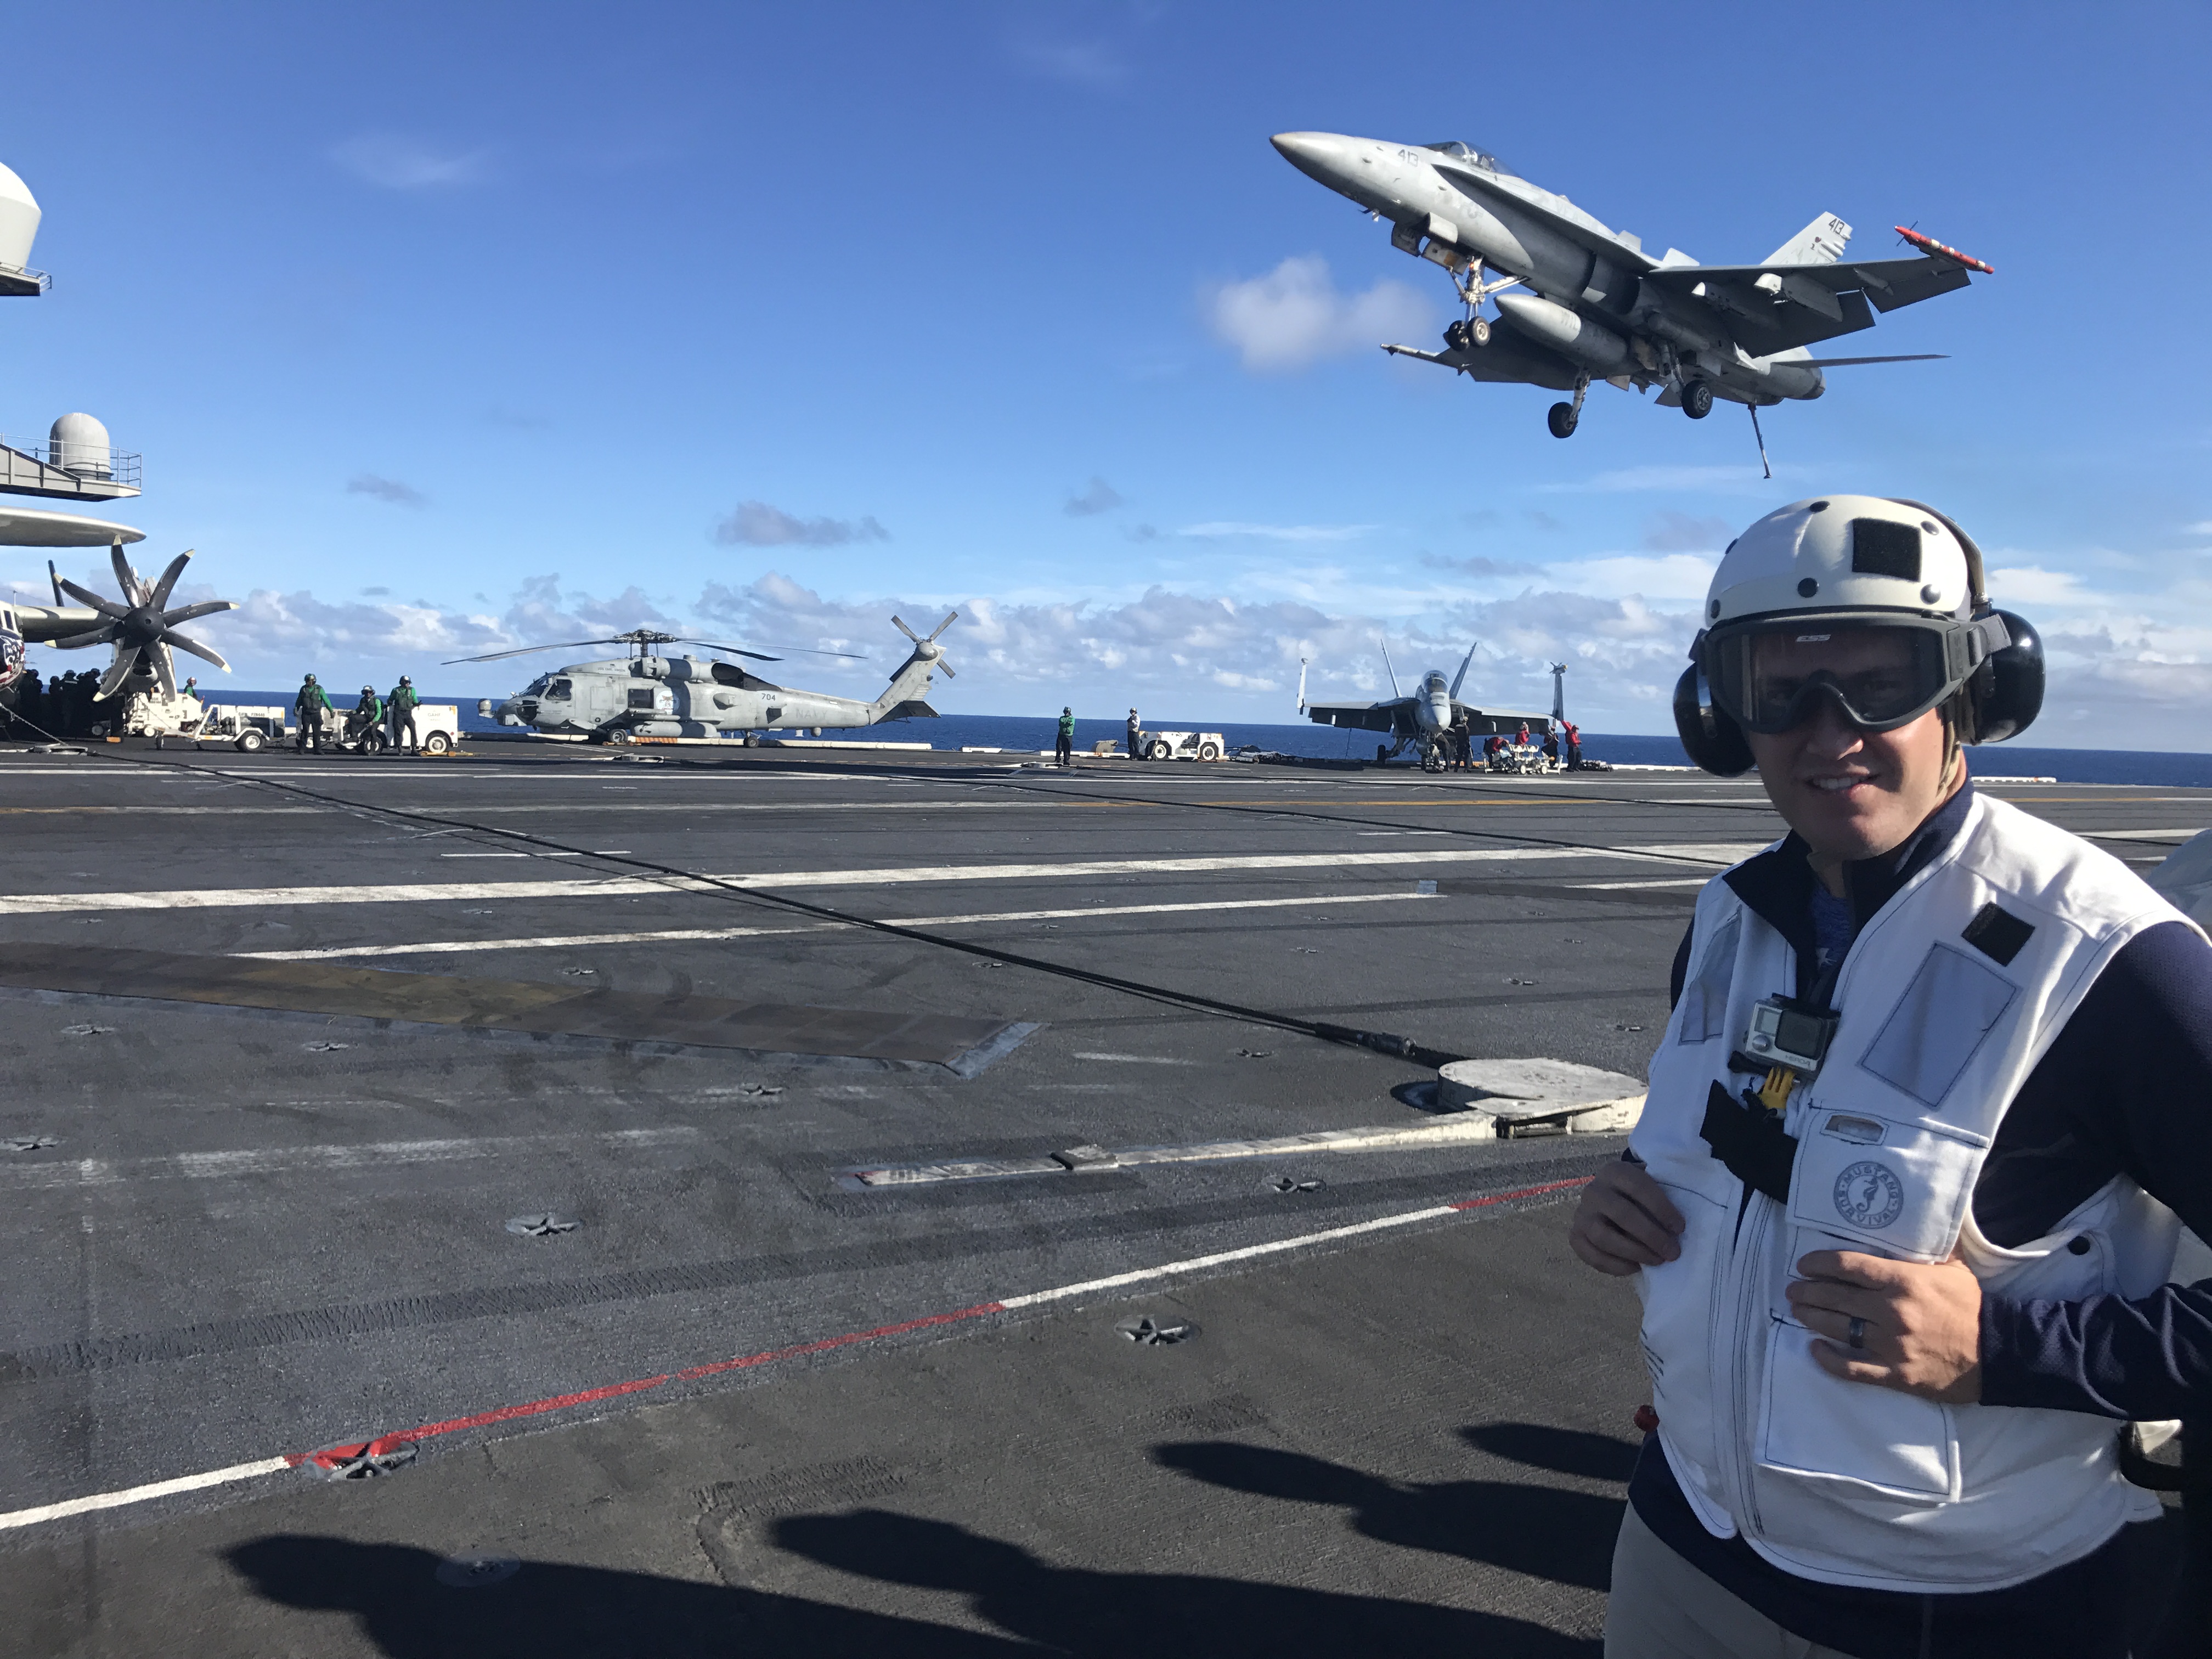 LTCC President Jeff DeFranco on the flight deck of the USS Carl Vinson, with an F-18 fighter jet landing behind him